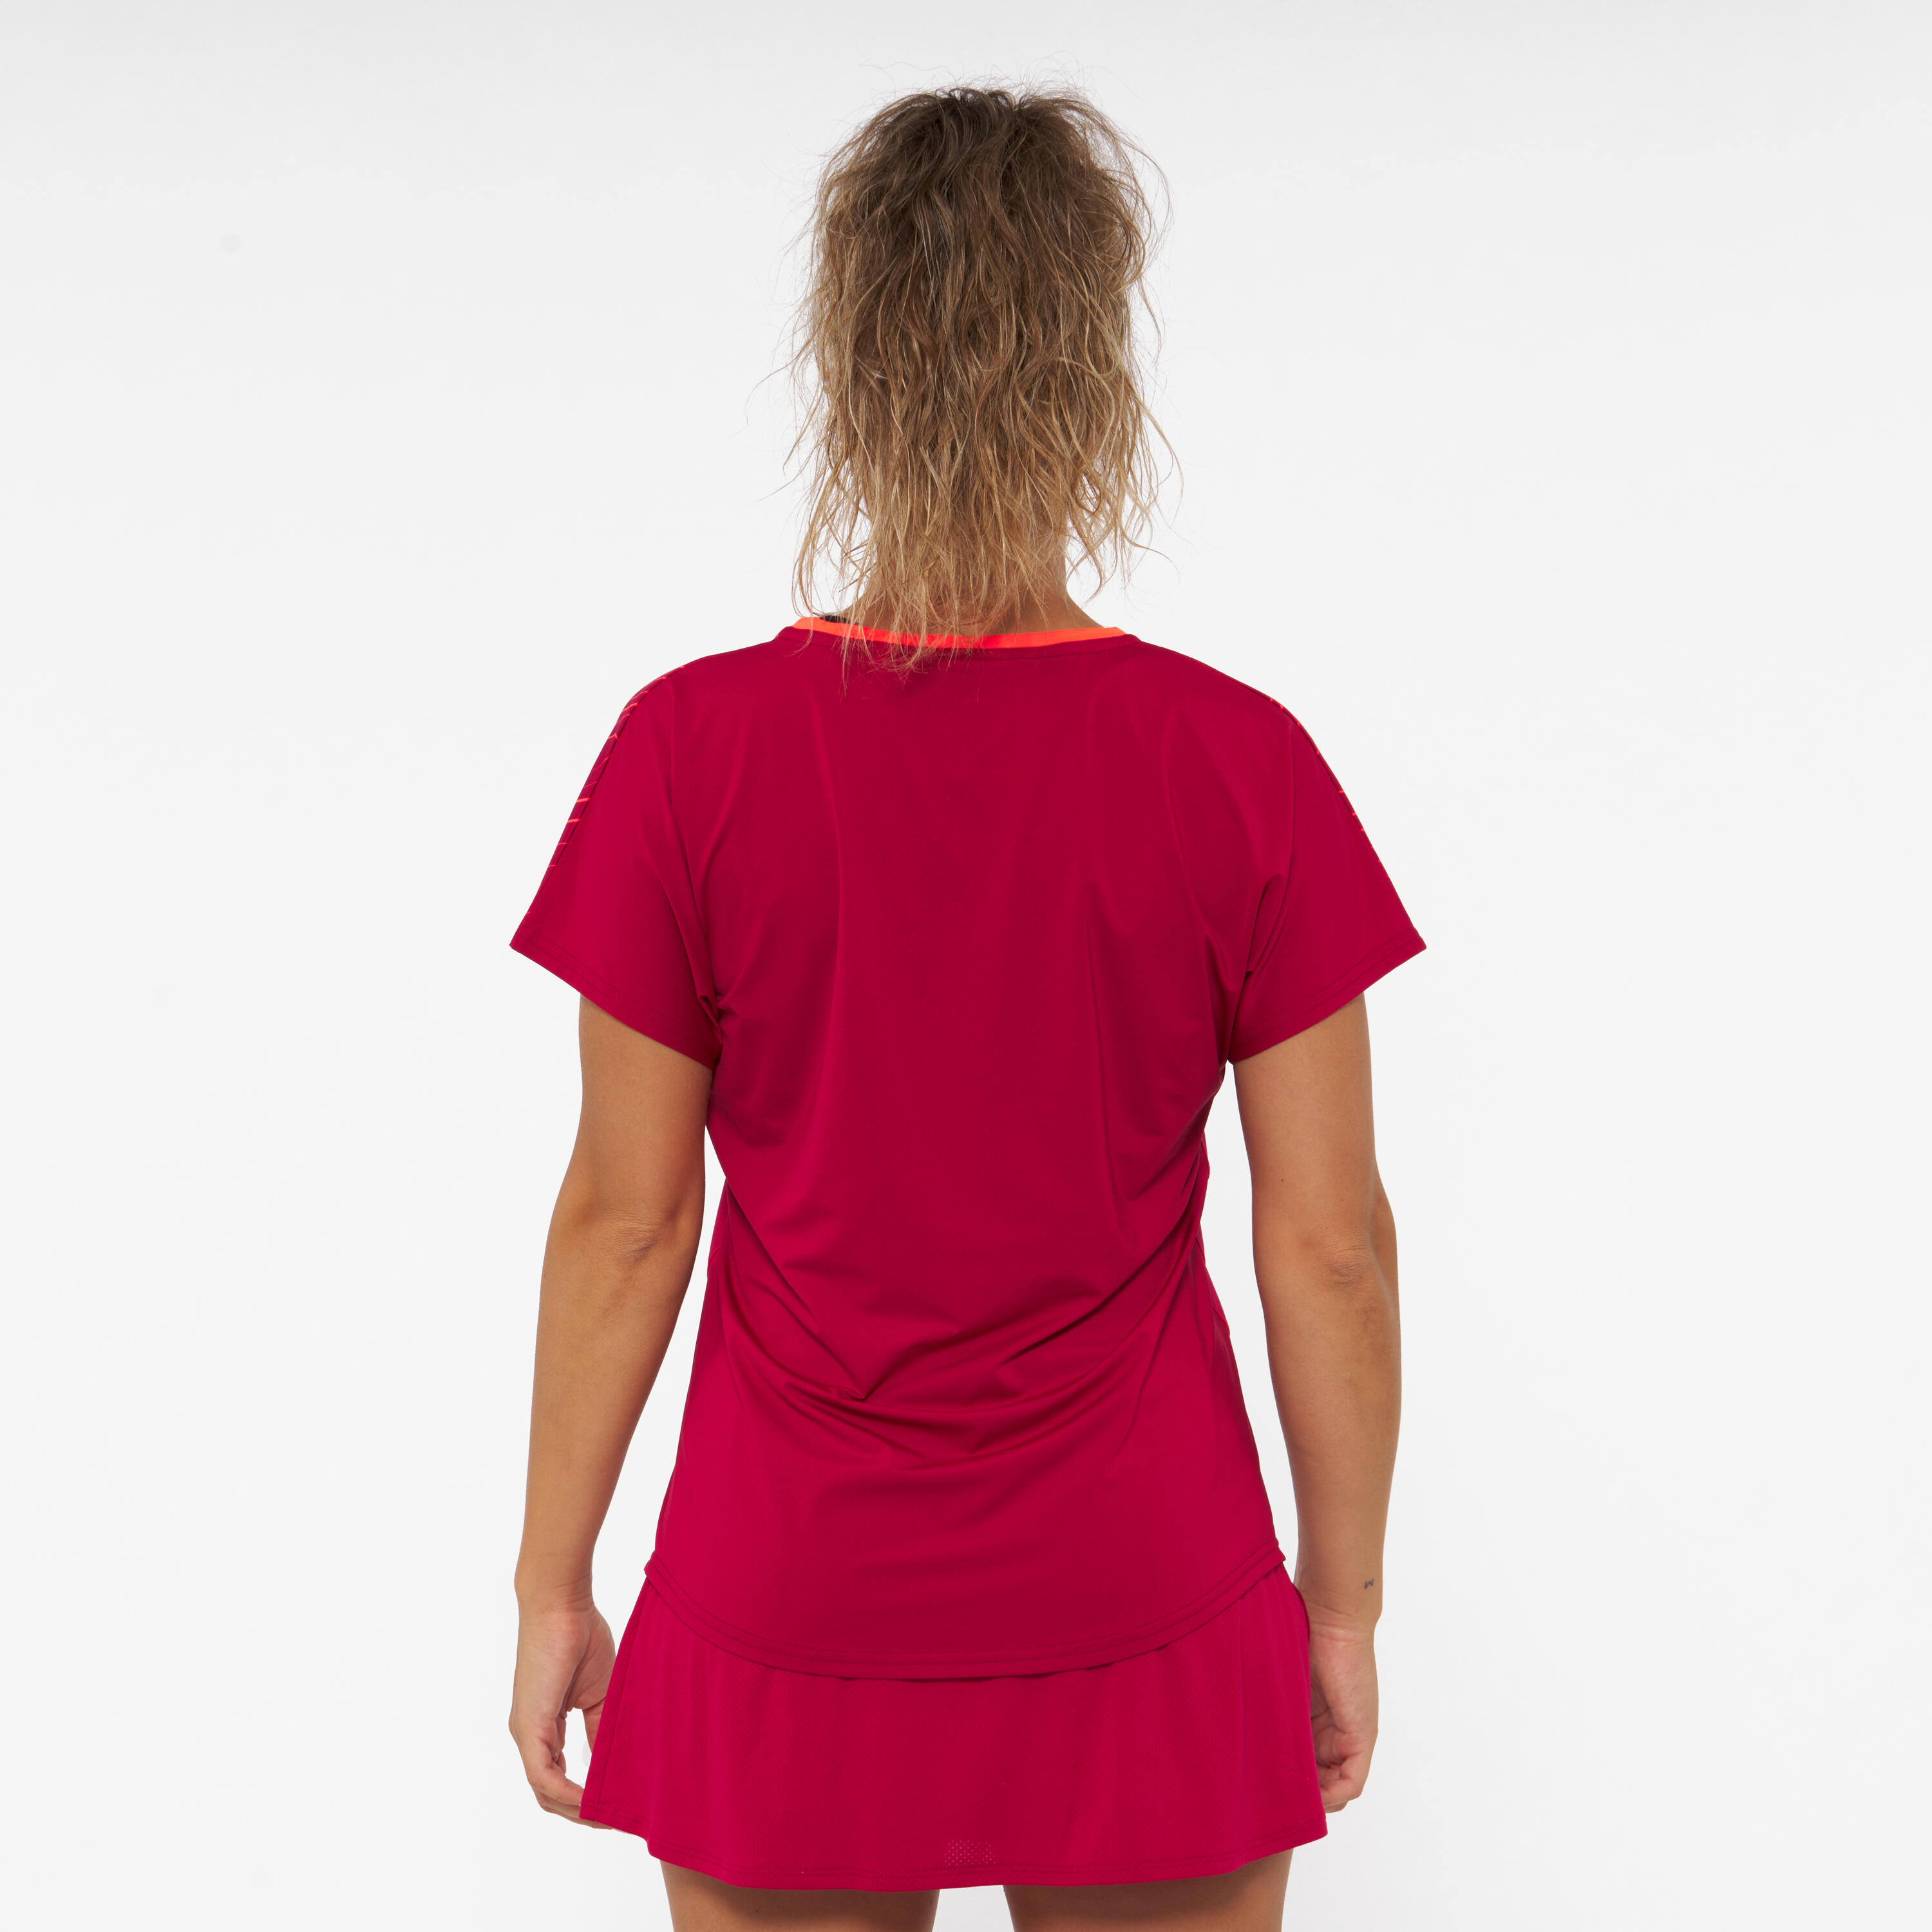 Women's Breathable Short-Sleeved Padel T-Shirt 500 - Red 4/7